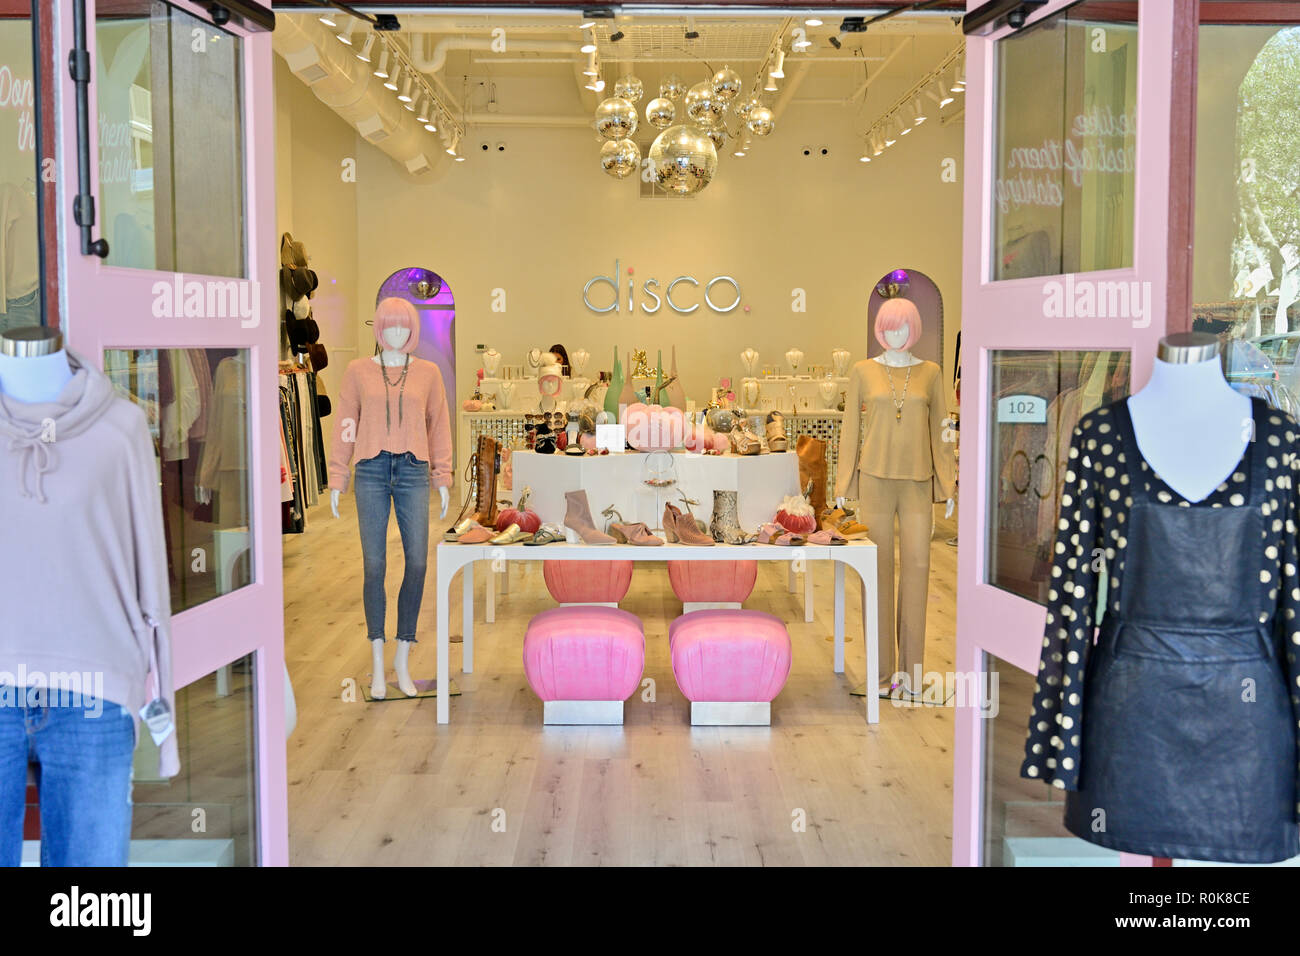 Disco, a young woman's clothing boutique clothing and accessory store in fashionable resort town of Rosemary Beach Florida USA. Stock Photo